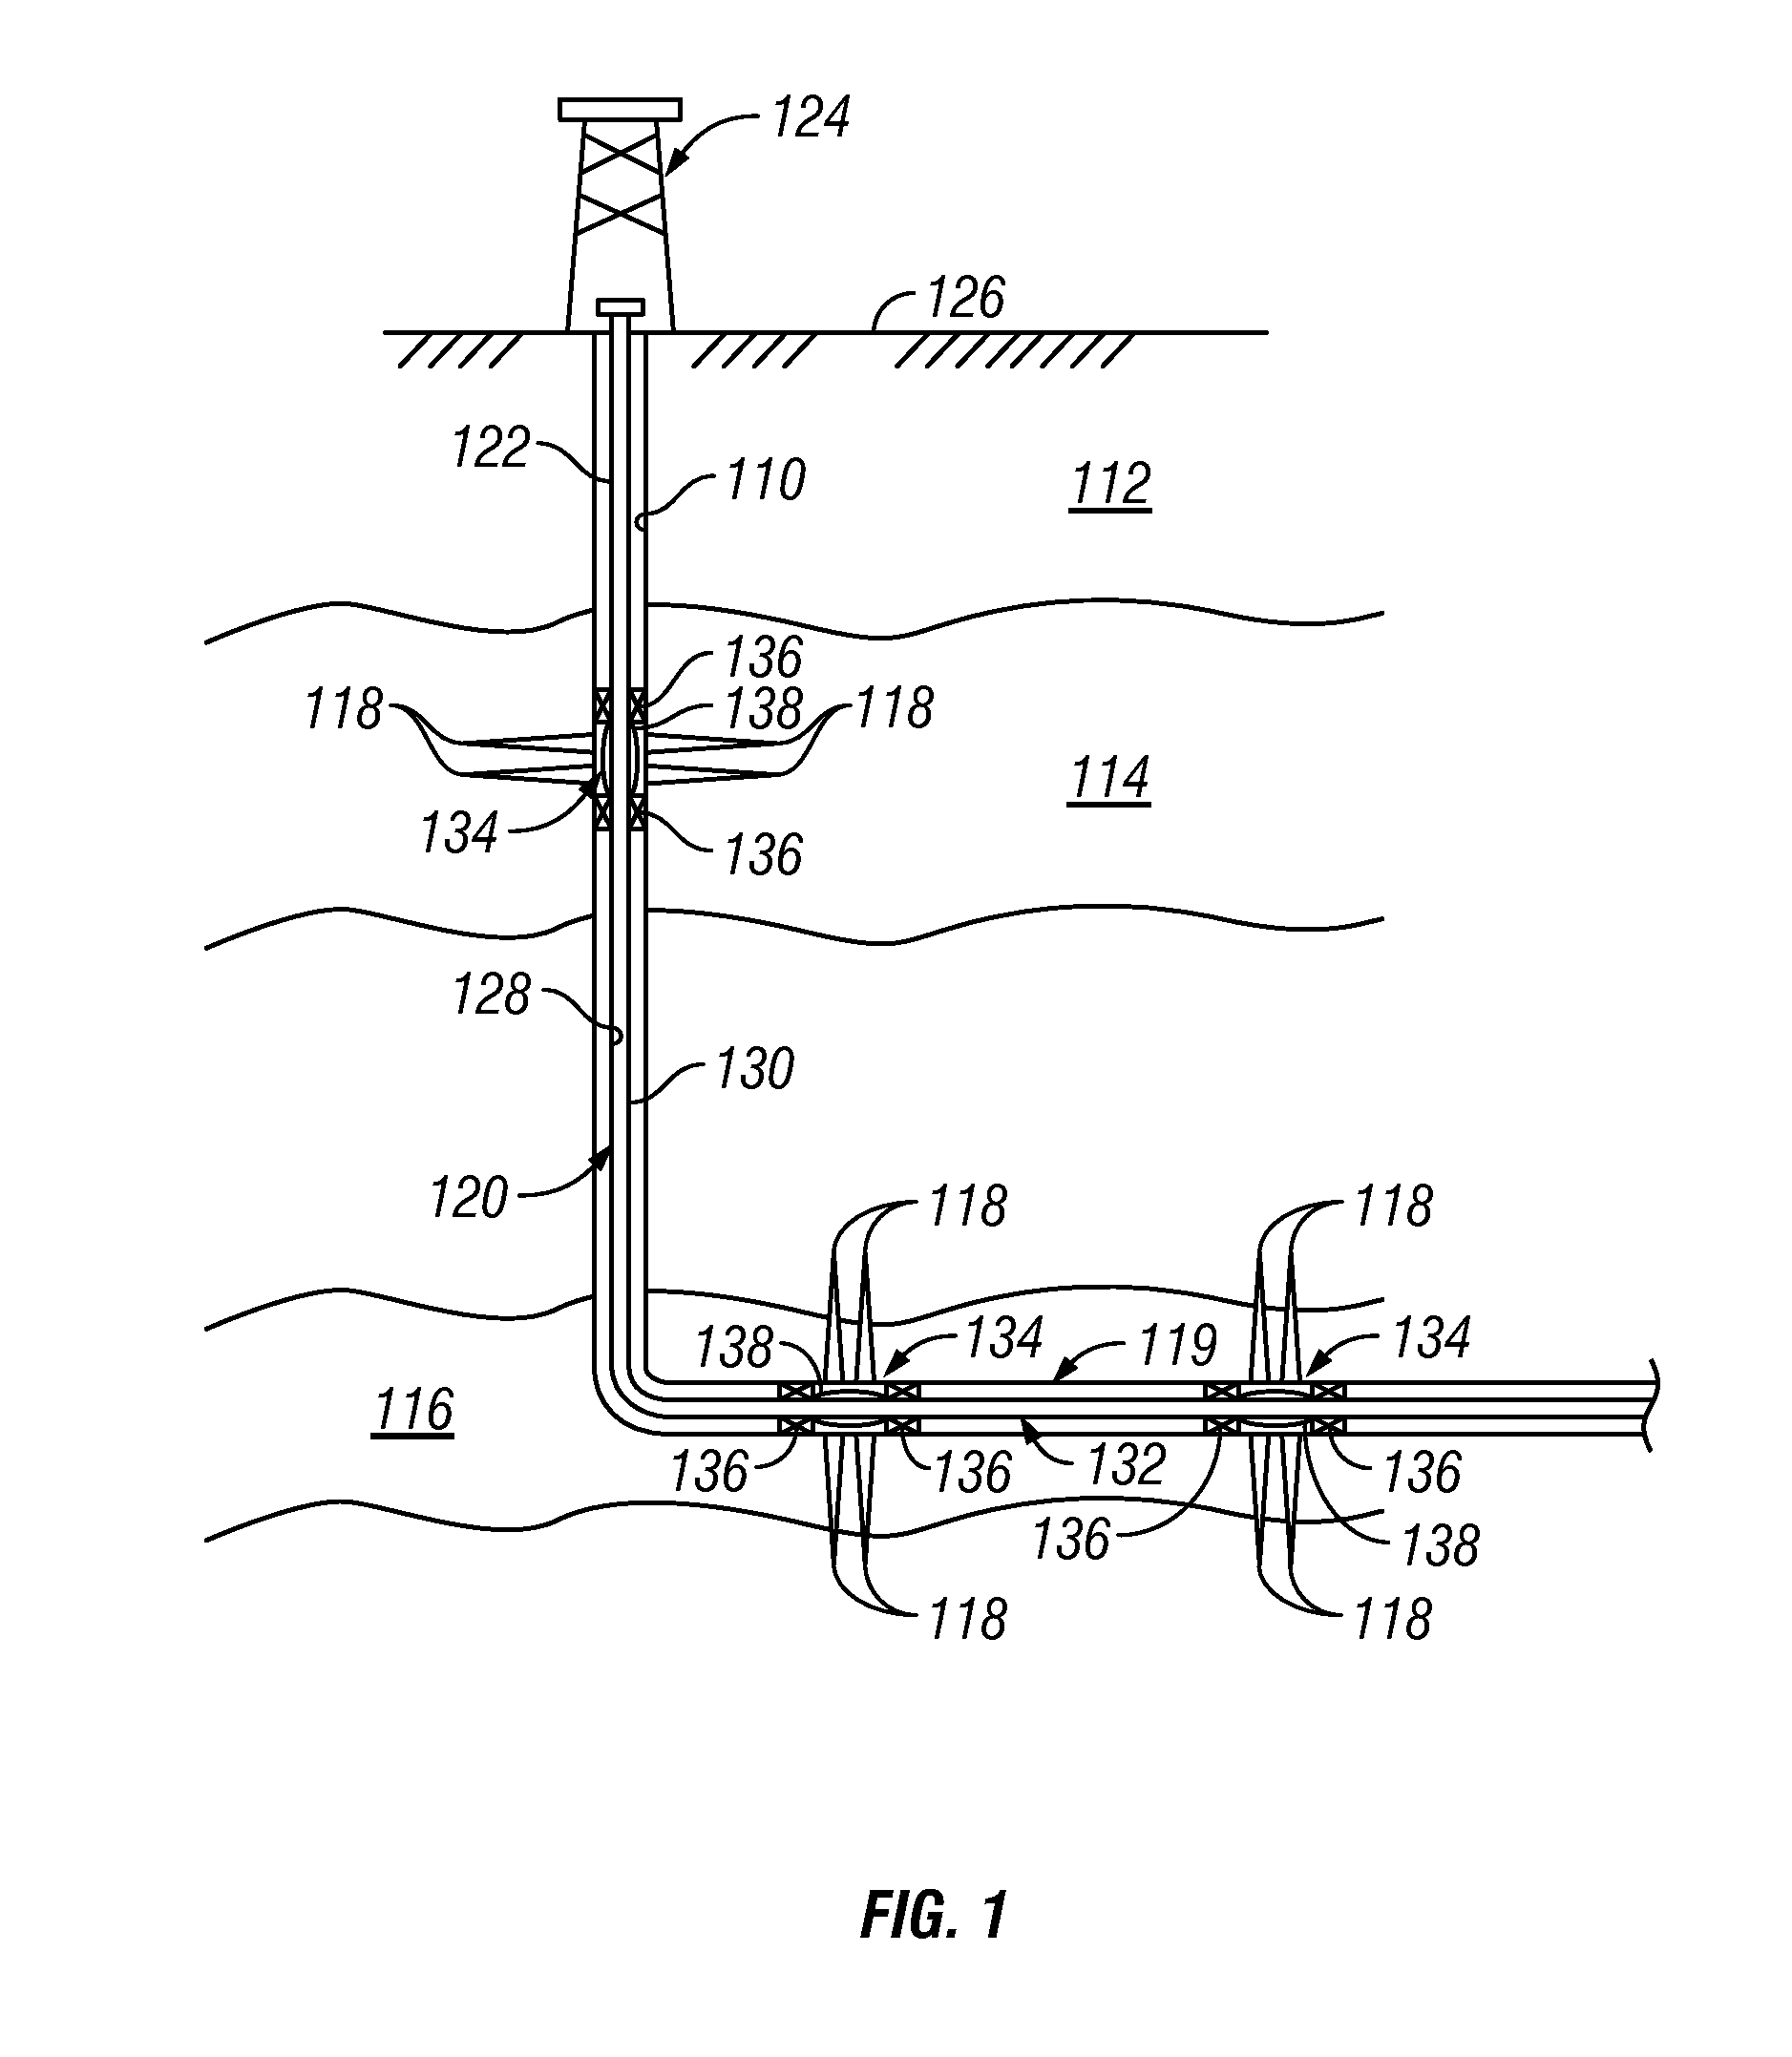 Flow Control Device That Substantially Decreases Flow of a Fluid When a Property of the Fluid is in a Selected Range